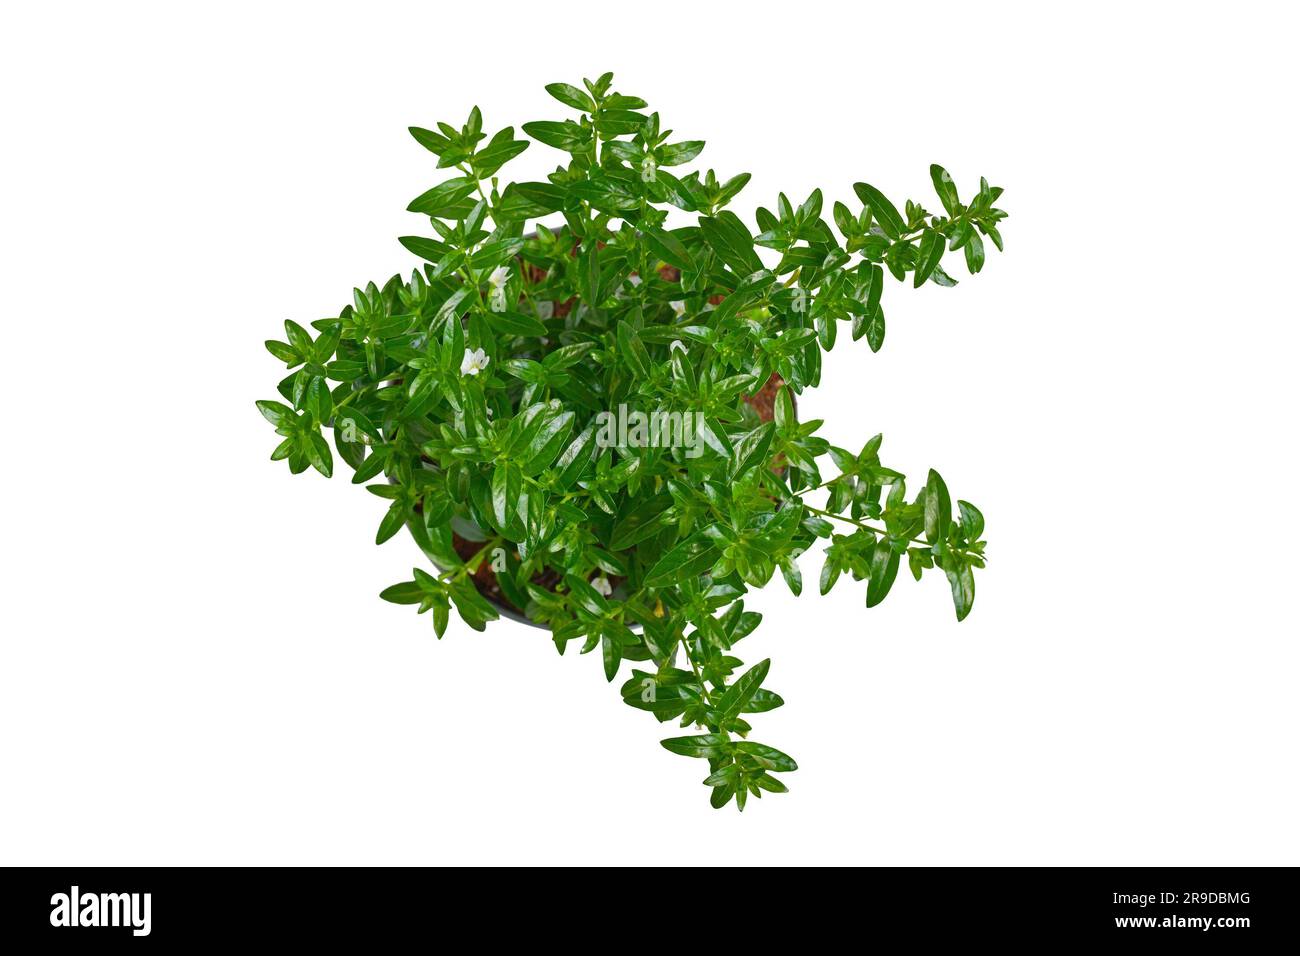 Top view of potted 'Cuphea Hyssopifolia' plant with small white flowers on white background Stock Photo